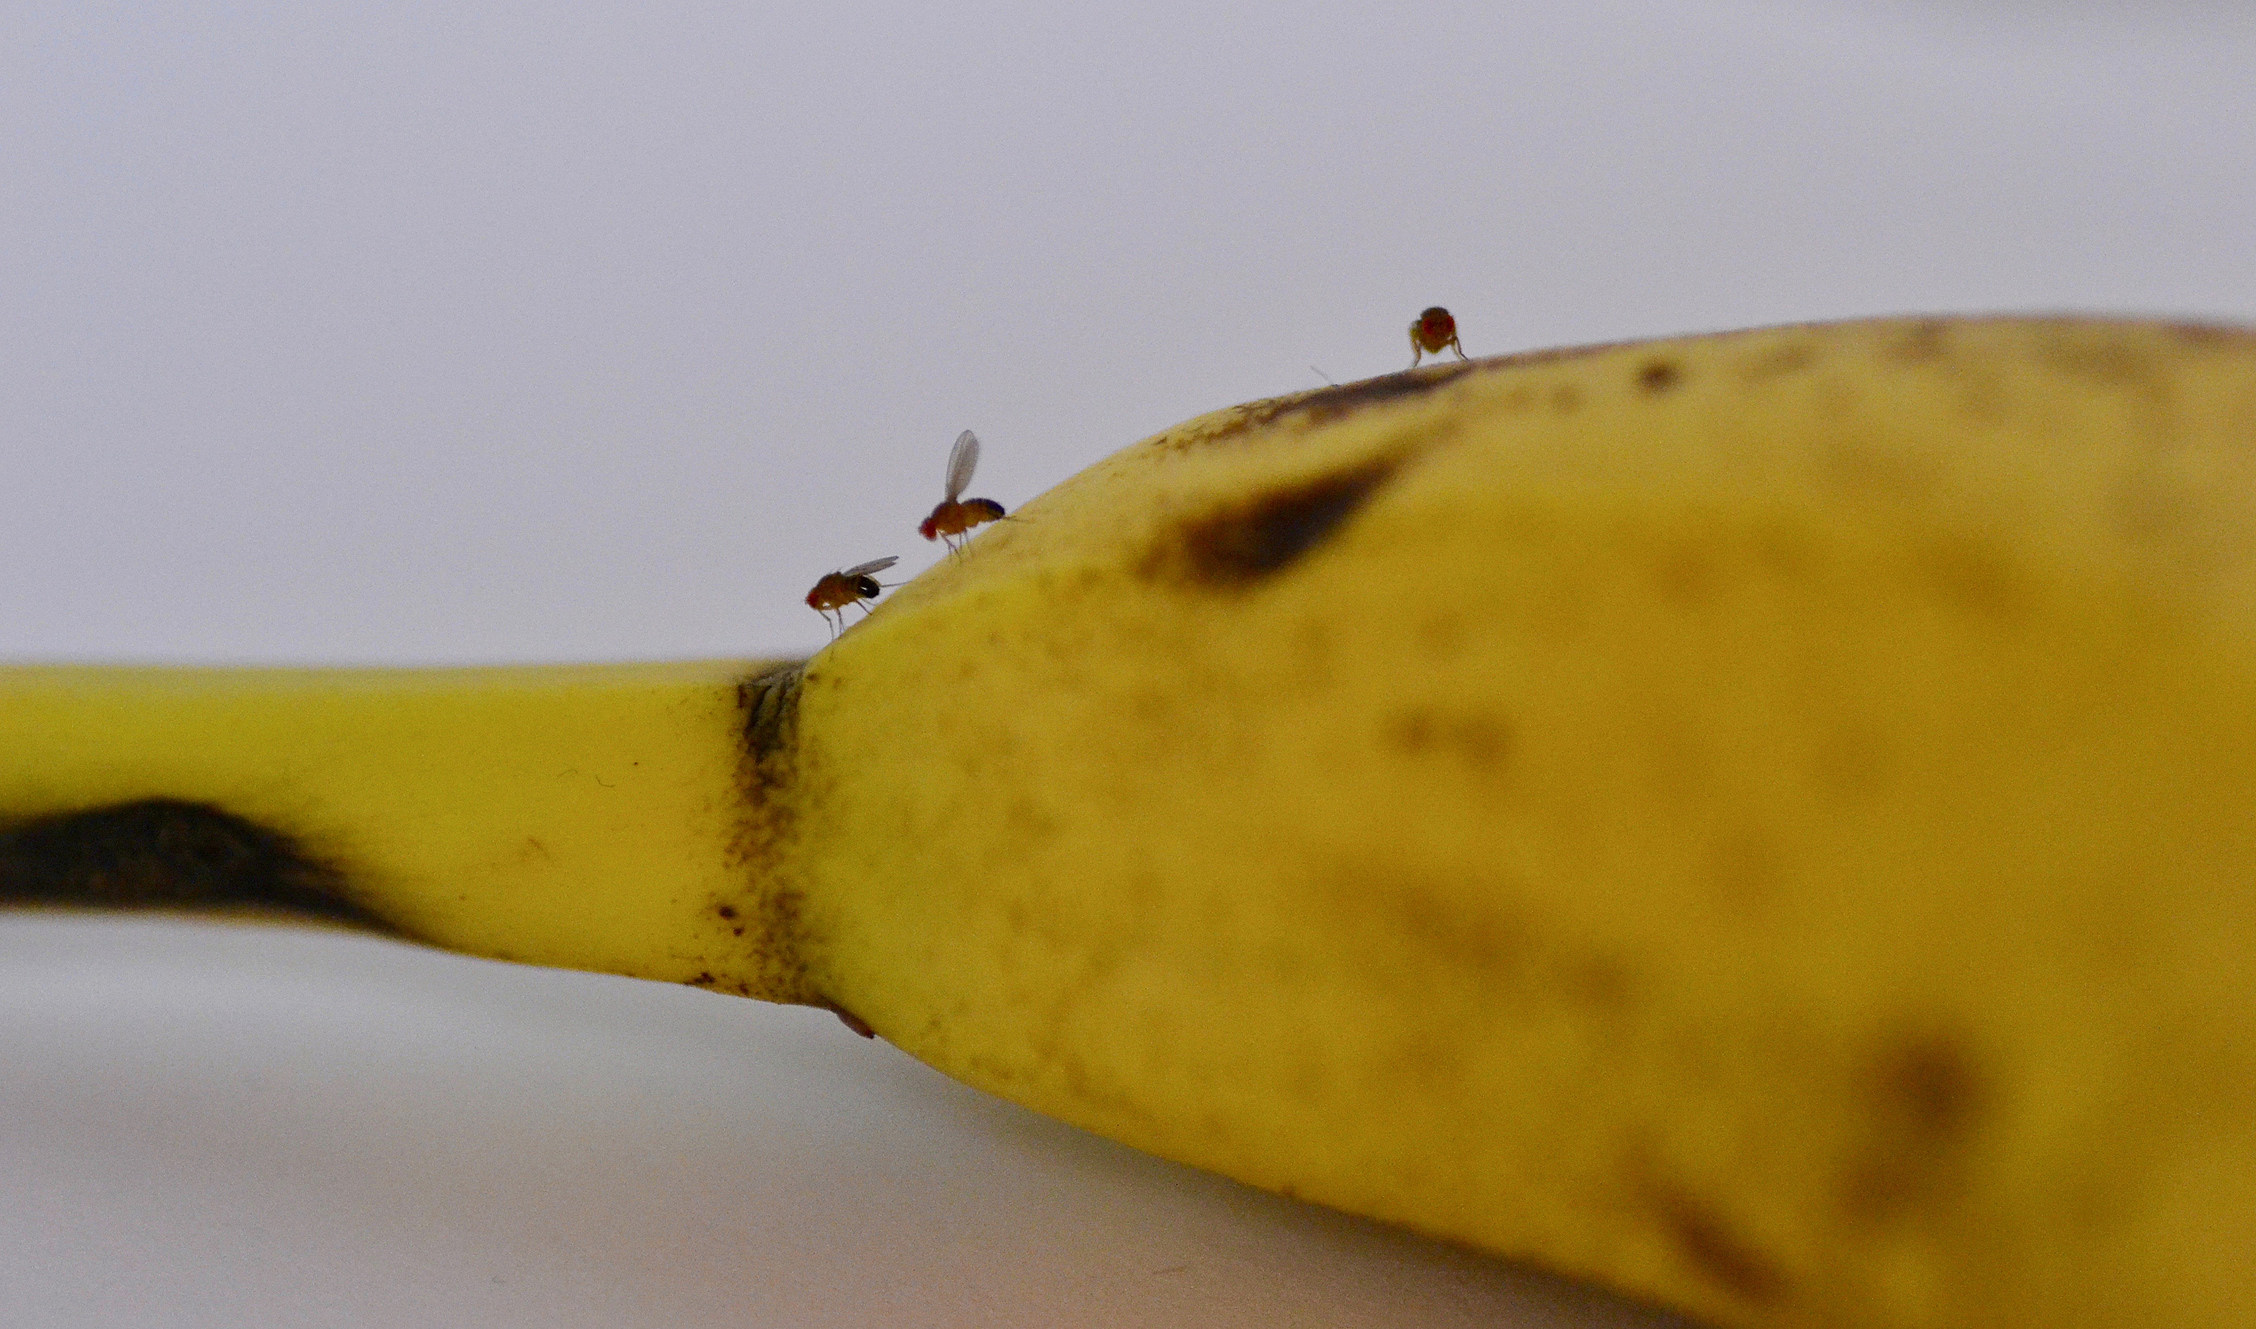 How To Get Rid Of Fruit Flies In The House - The Maids